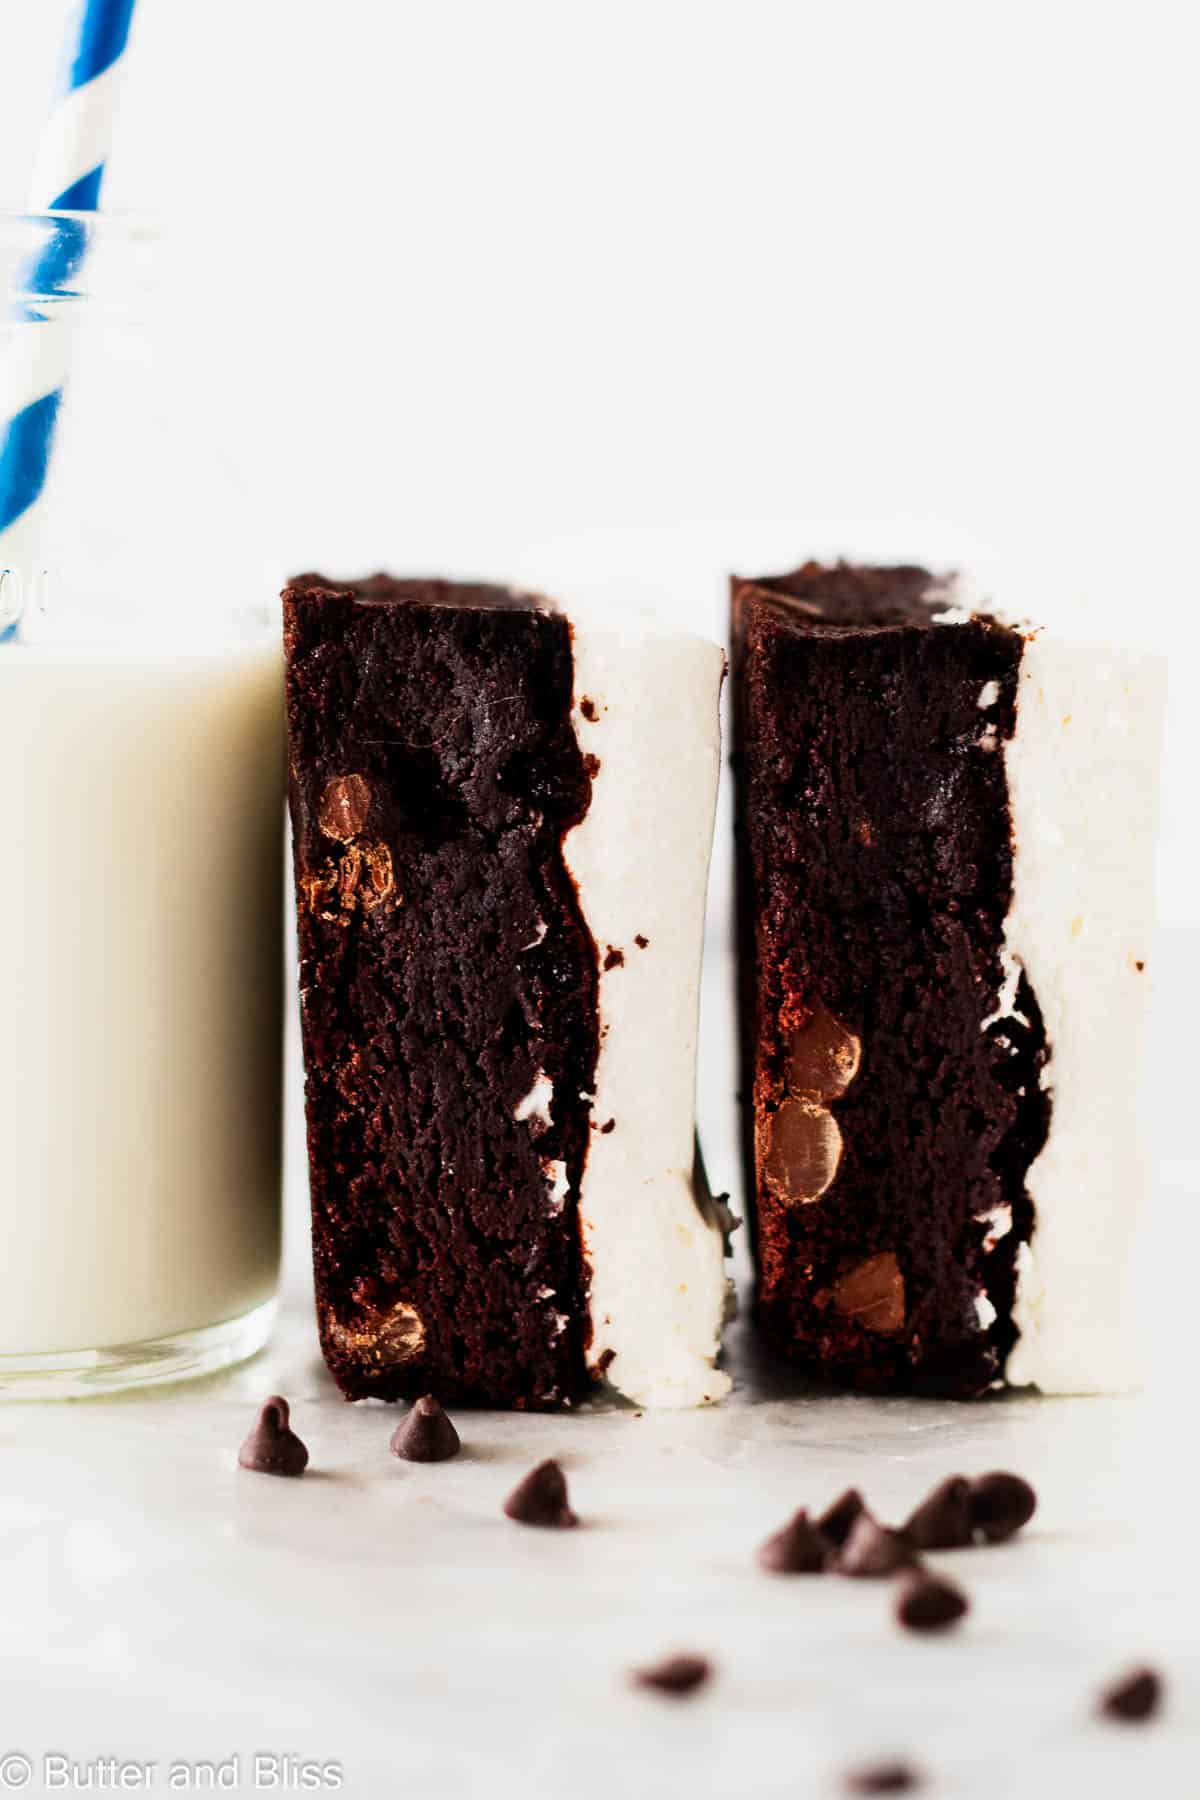 Two brownies with whipped topping propped against a glass of milk.